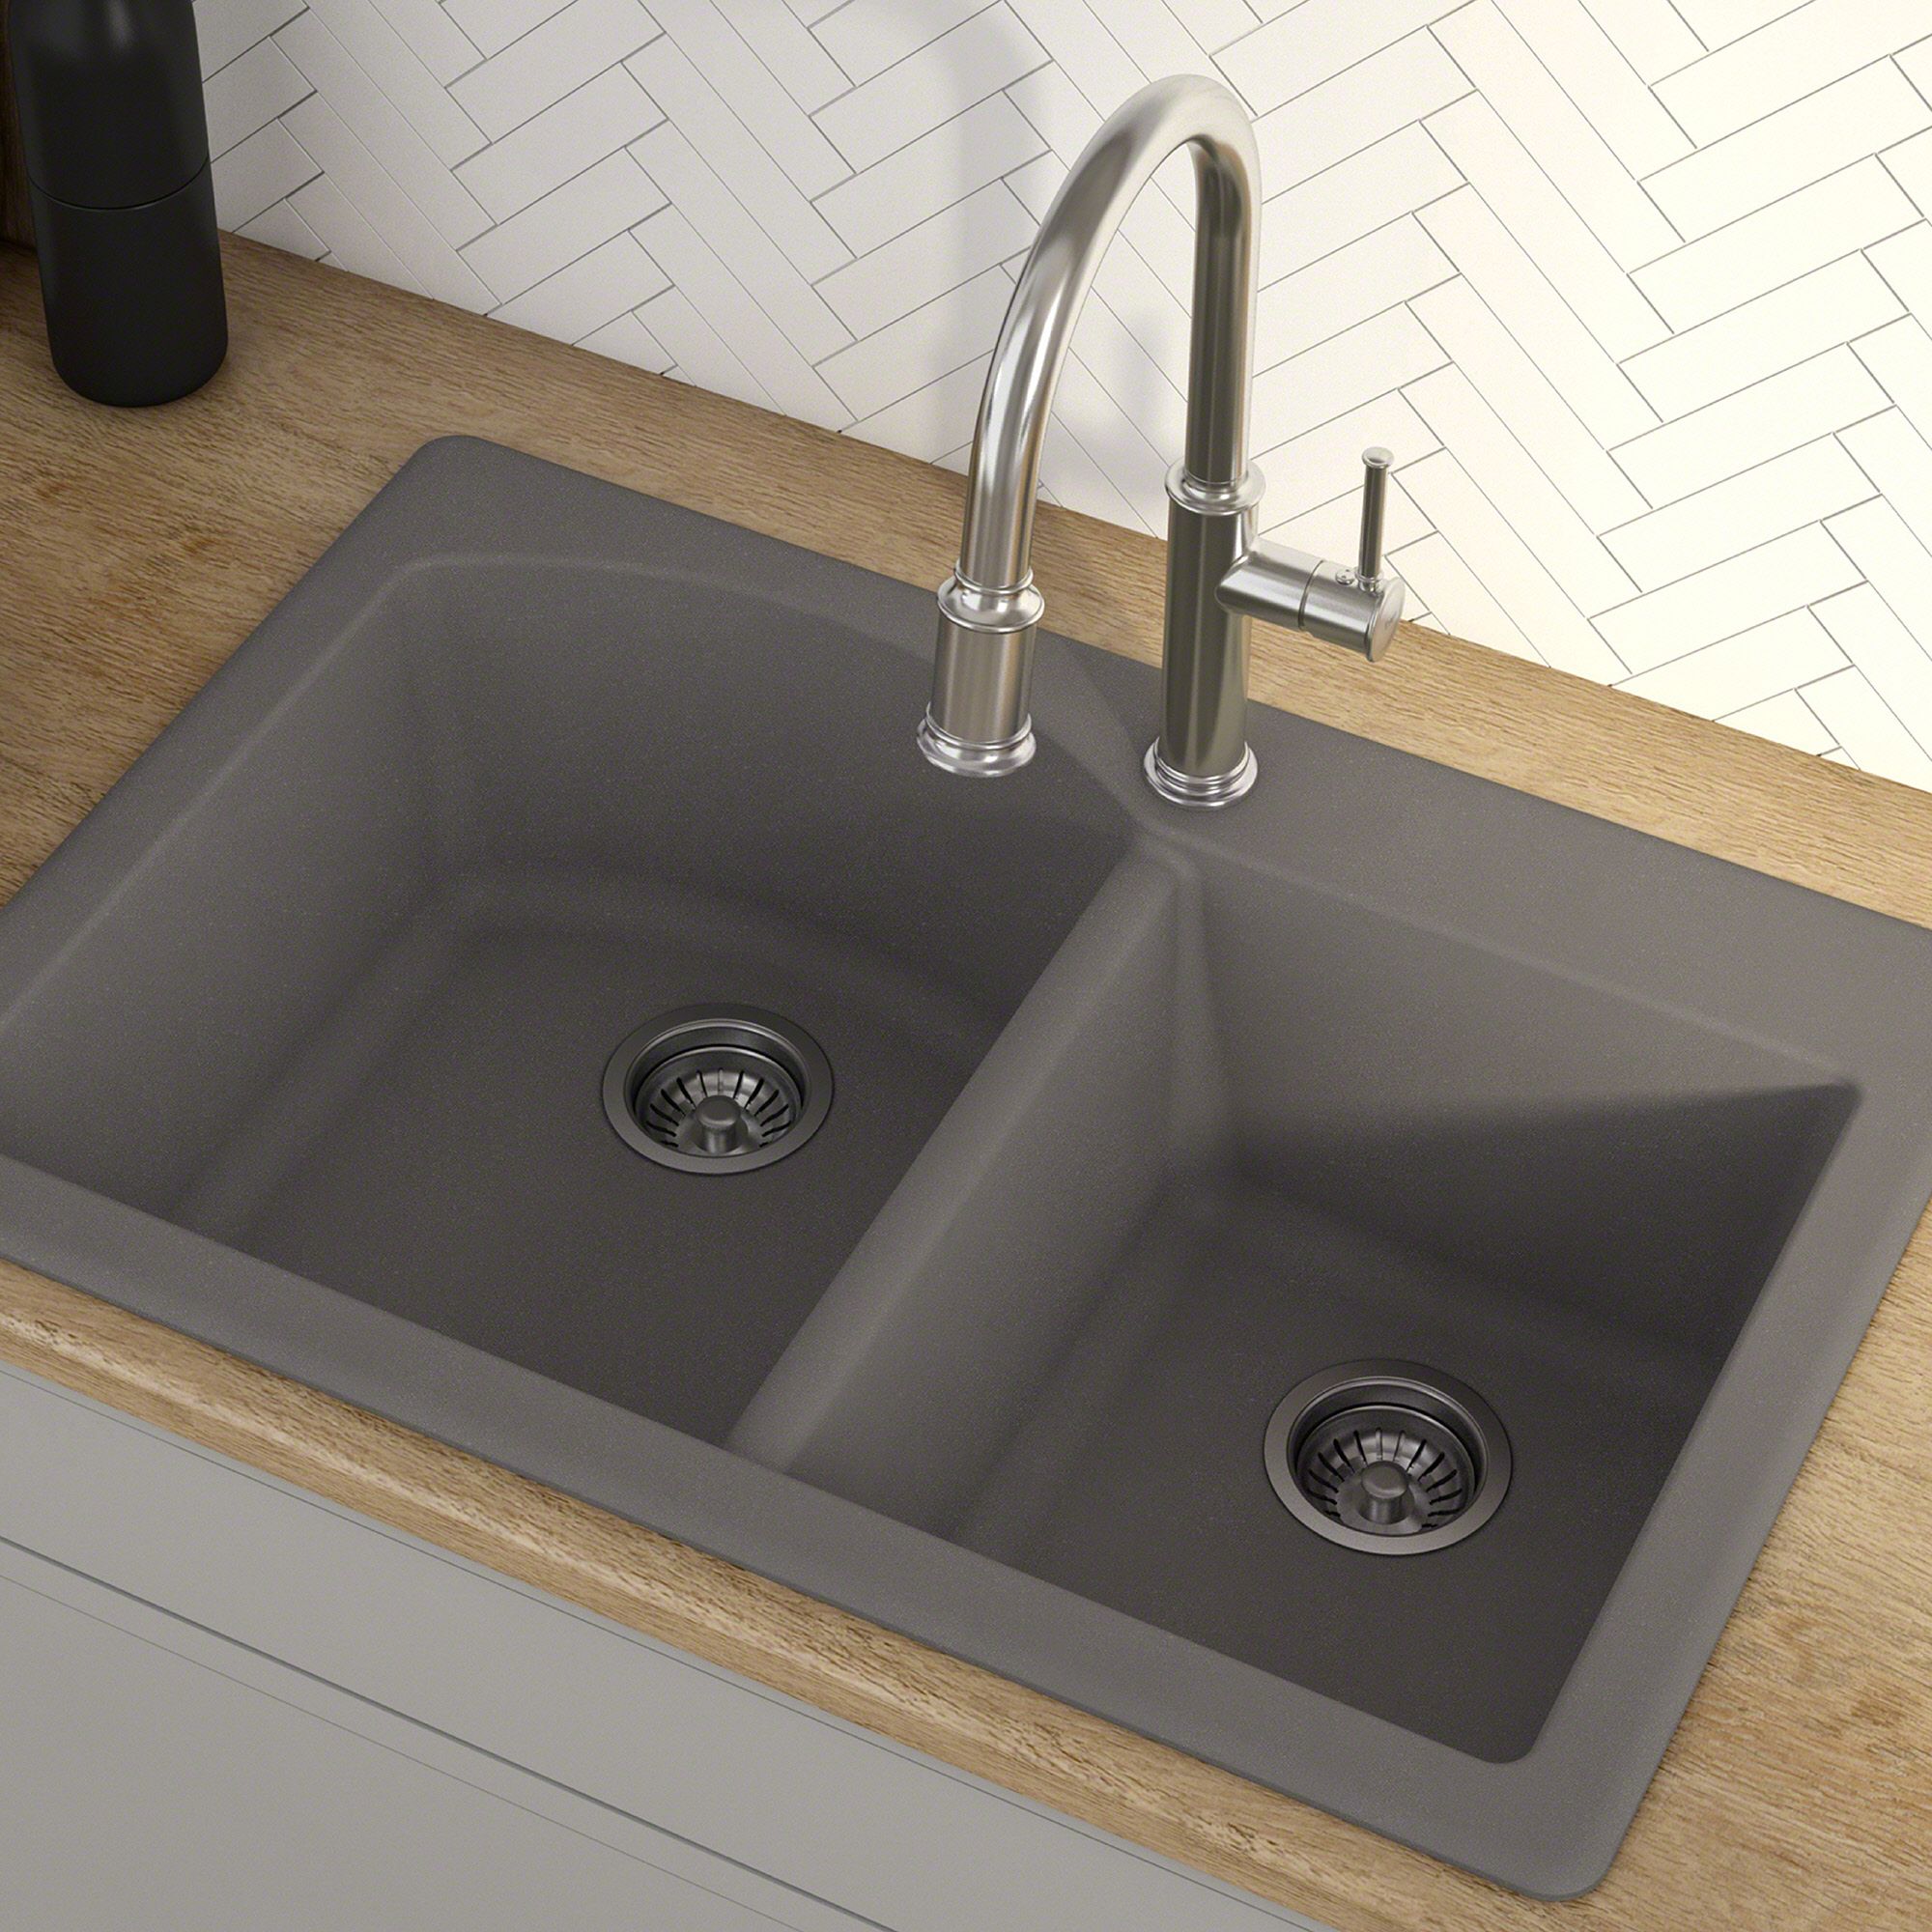 Why Should You Have a Double Bowl Sink in the Kitchen? - Optimistic Mommy